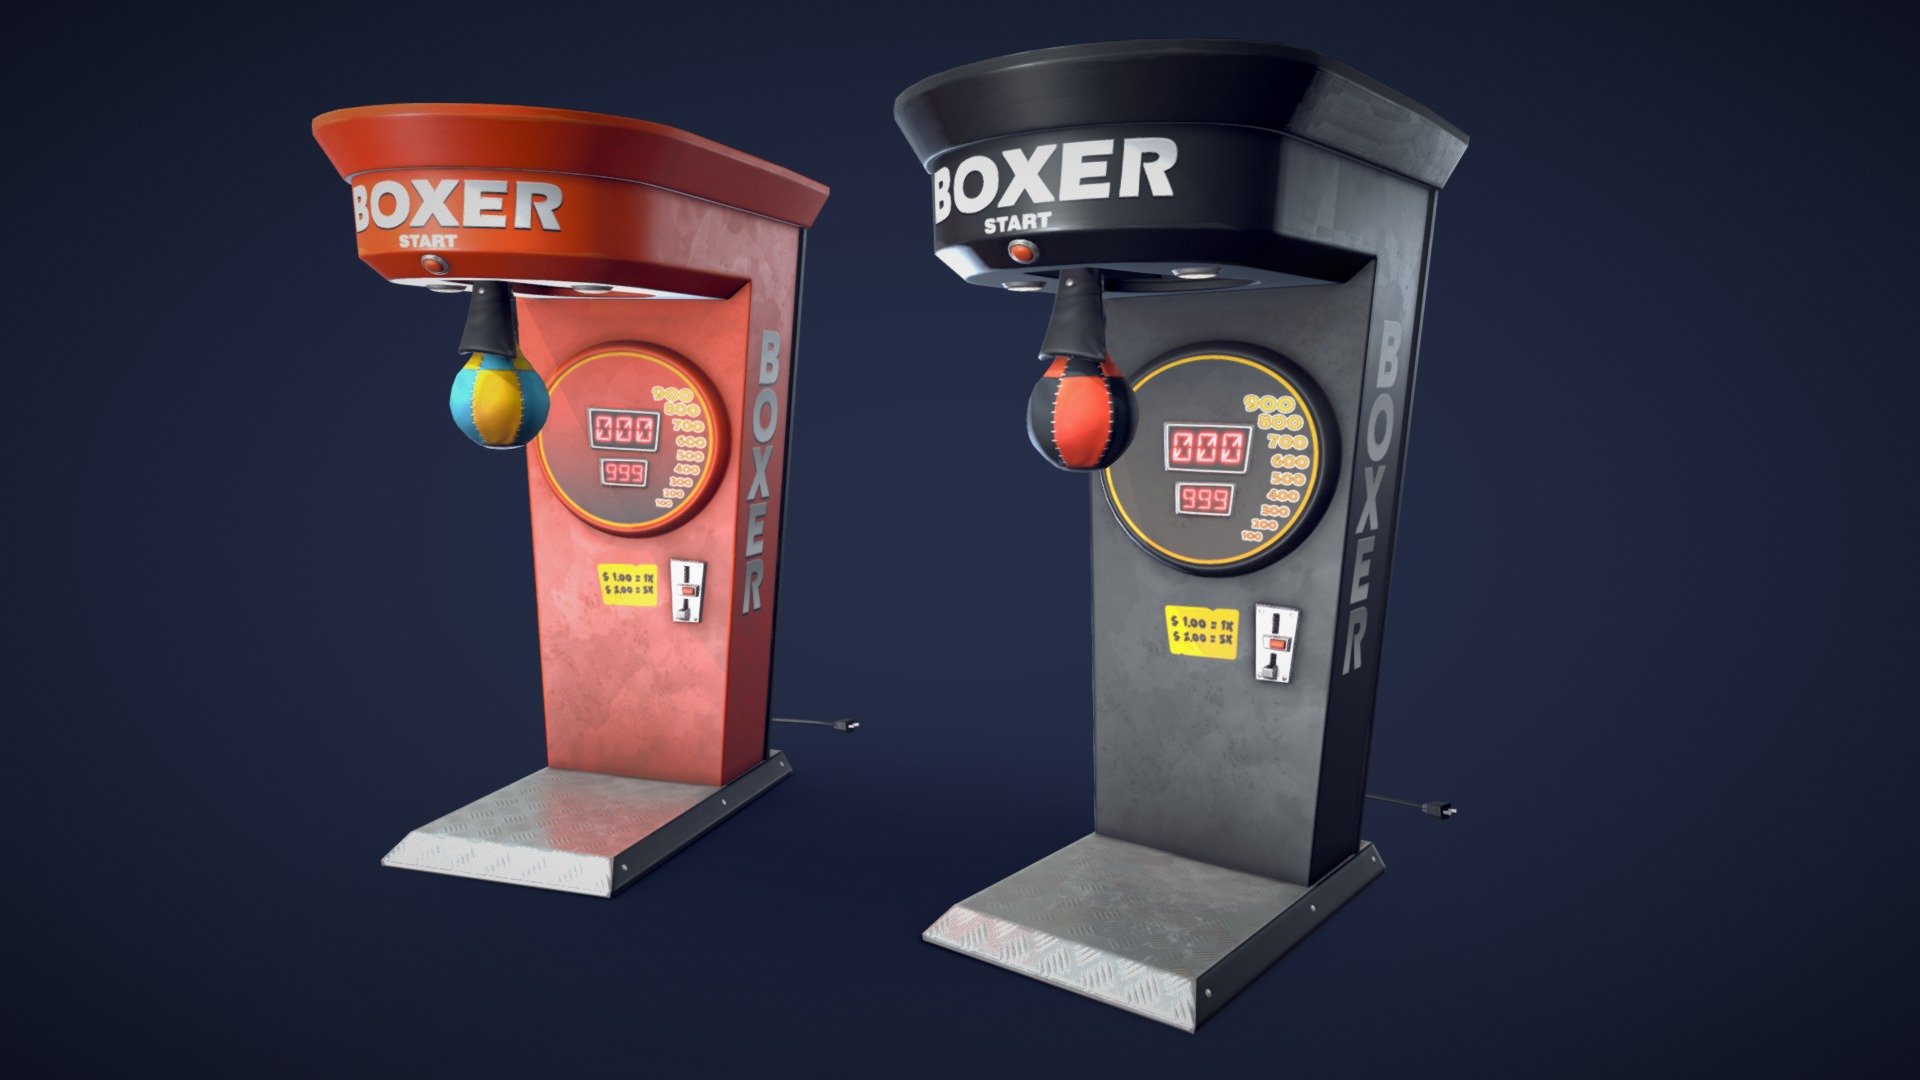 A optimized 3D model of a punching / boxing machine.
The asset comes with 2 options for textures that can change the color of the machine.
Whether you want to create a sporty arcade scene, a competitive game mode, or a challenging mini-game, this asset will add some excitement and action to your game.

Model information:




Optimized low-poly assets for real-time usage.

Optimized and clean UV mapping.

2K and 4K textures for the assets are included.

Additional unposed punching machine is included.

Additional punching machine (bag up) is included.

2 color variation textures are included.

Compatible with Unreal Engine, Unity and similar engines.

All assets are included in a separate file as well.

Here is a look at the assets included in this pack:
 - Stylized Punching / Boxing Machine  - Low Poly - Buy Royalty Free 3D model by Lars Korden (@Lark.Art) 3d model